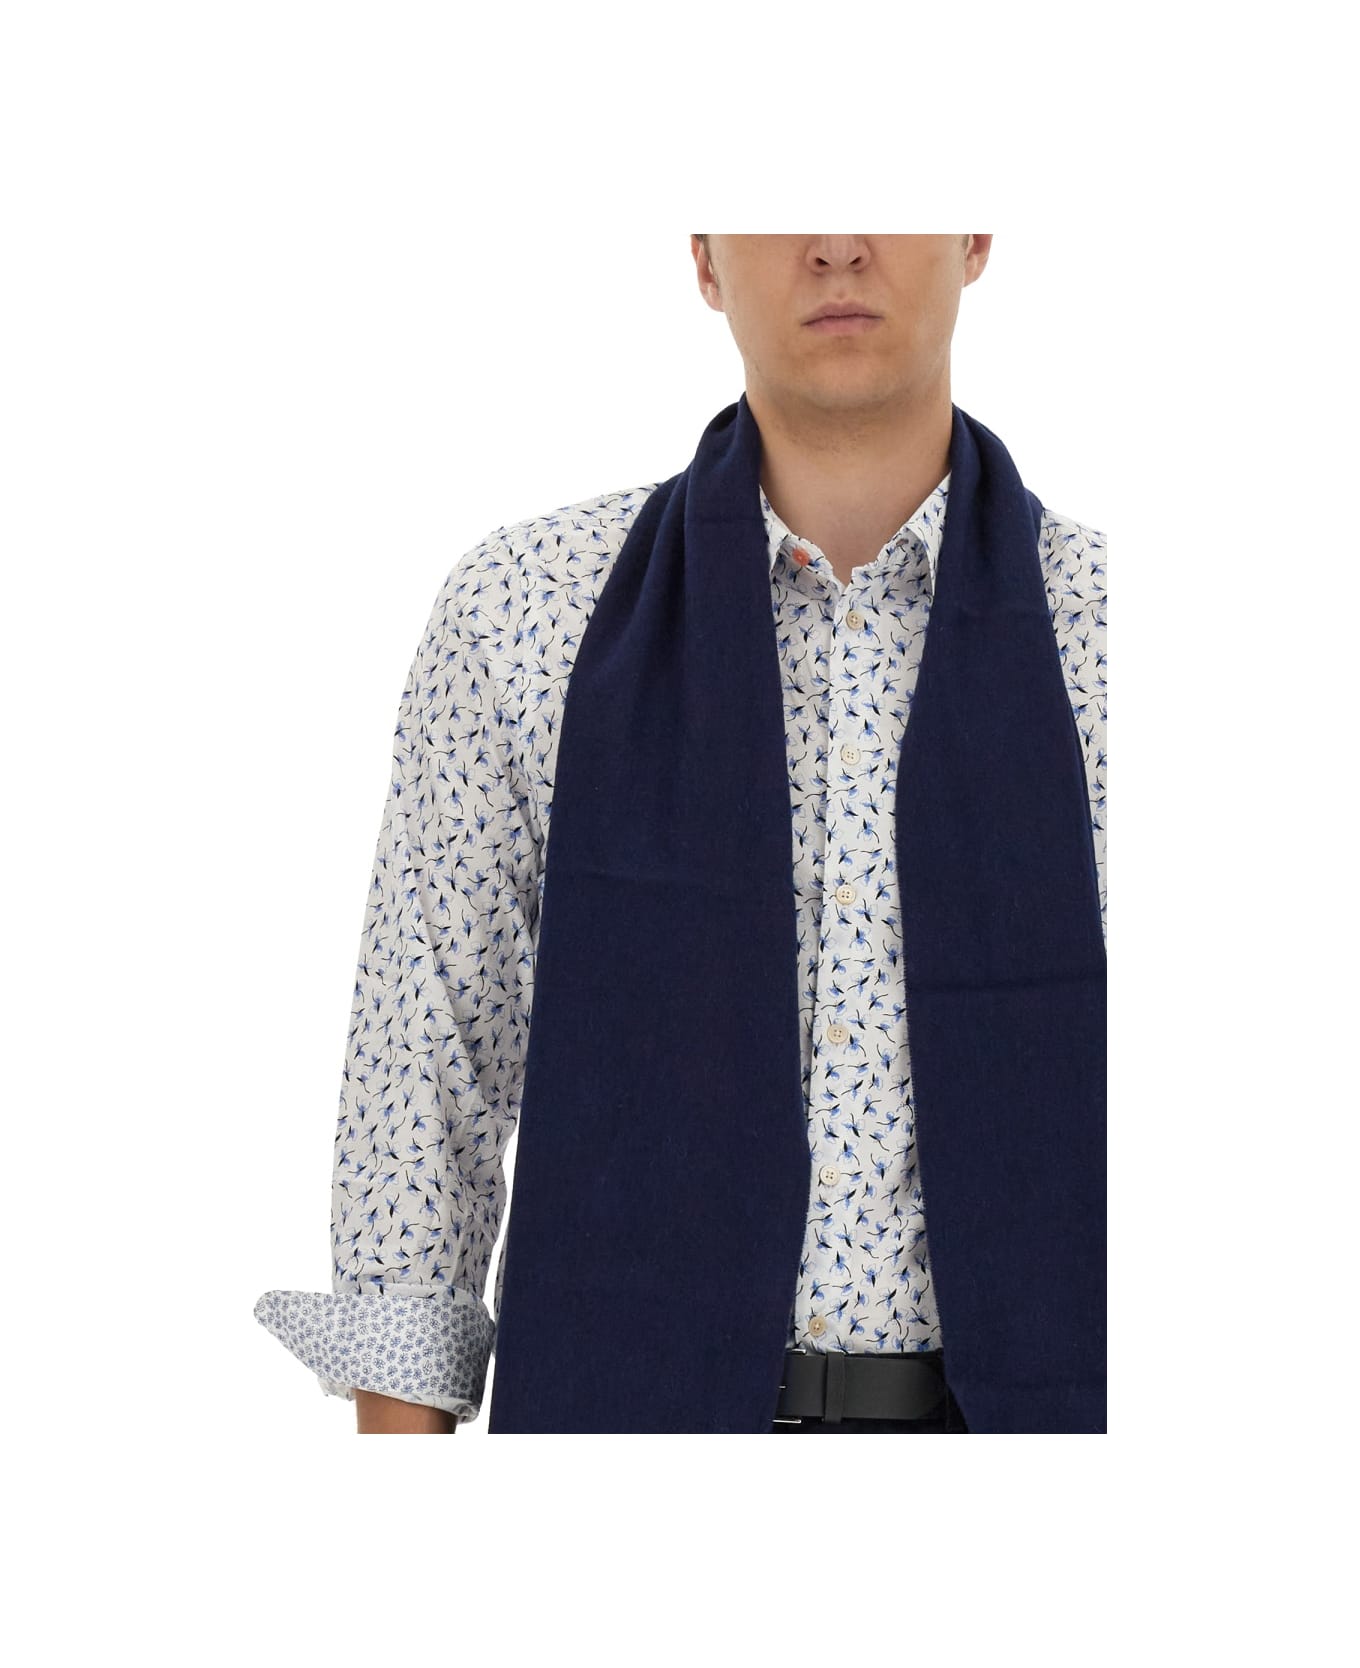 PS by Paul Smith Printed Shirt - WHITE シャツ